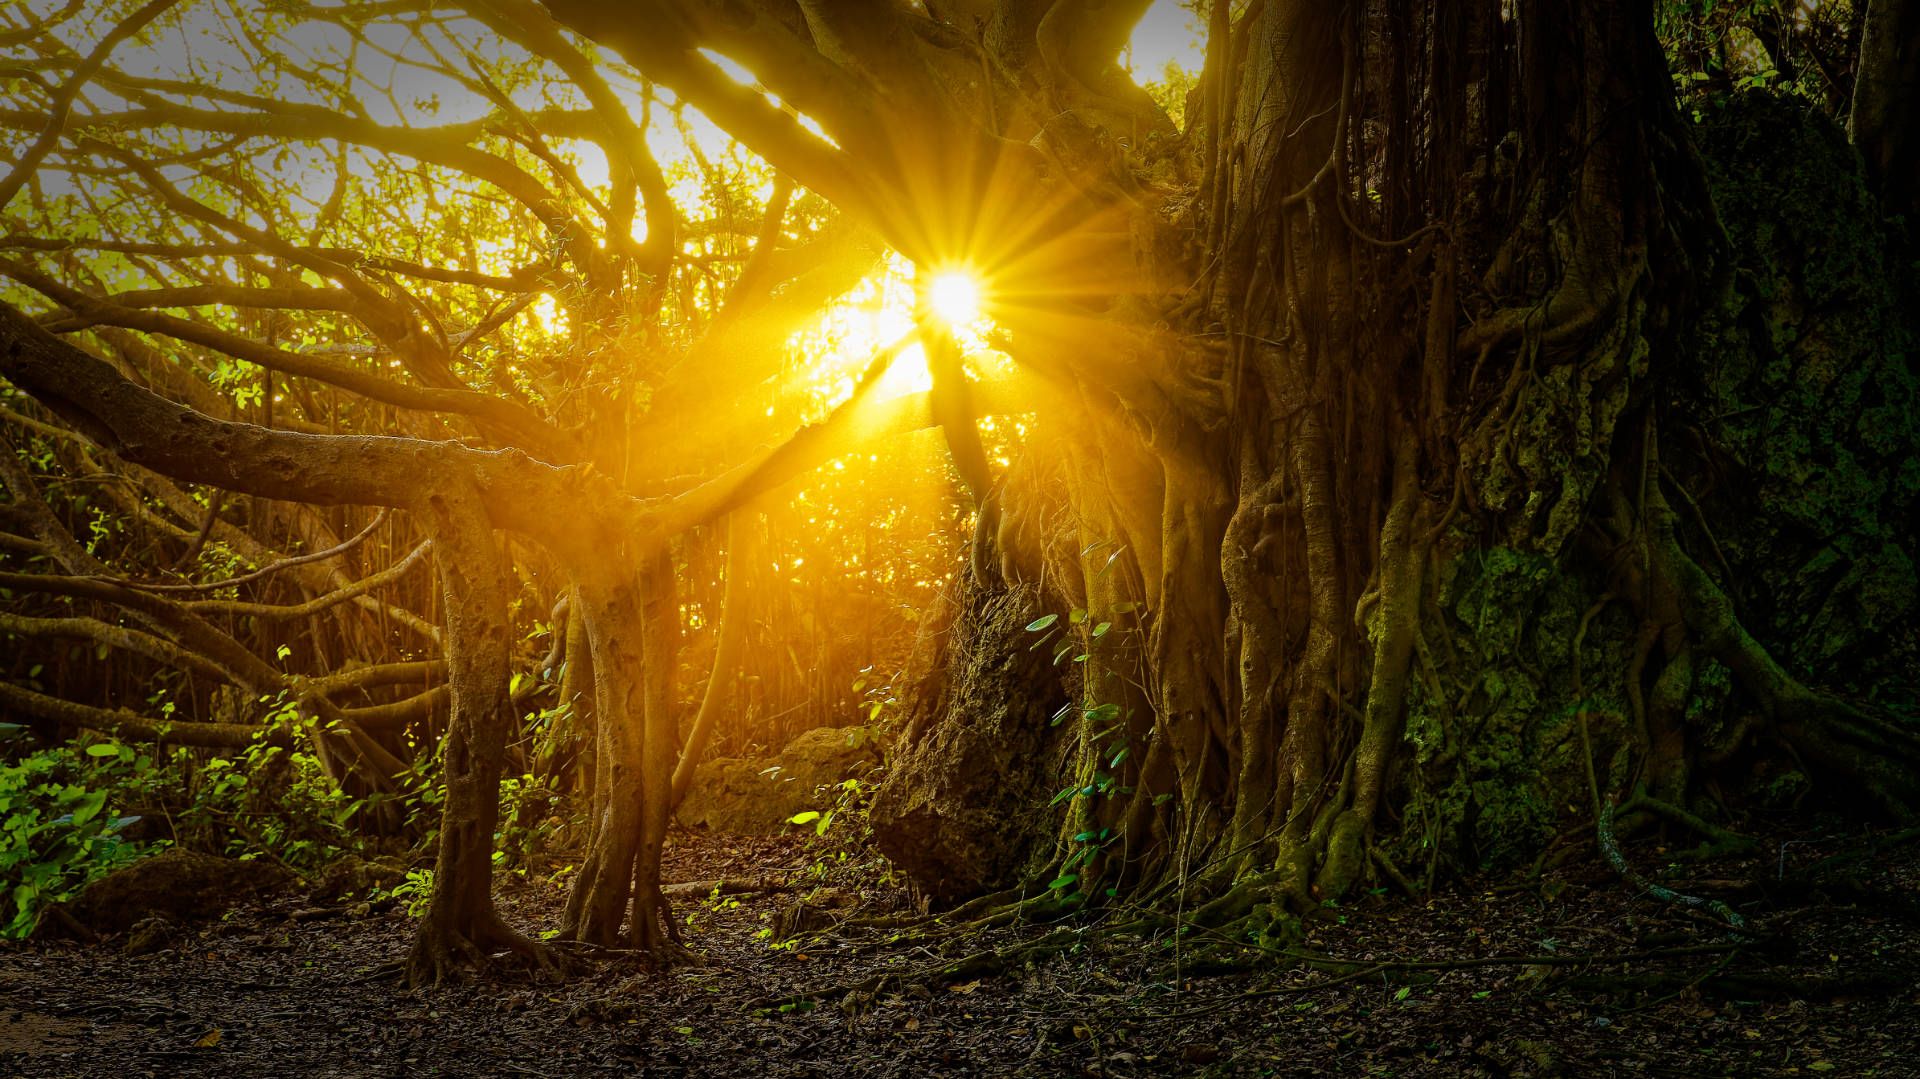 Photo of a forest scene, with twisting trees, roots partially covered in moss, and shafts of golden sunlight bursting through the trees.